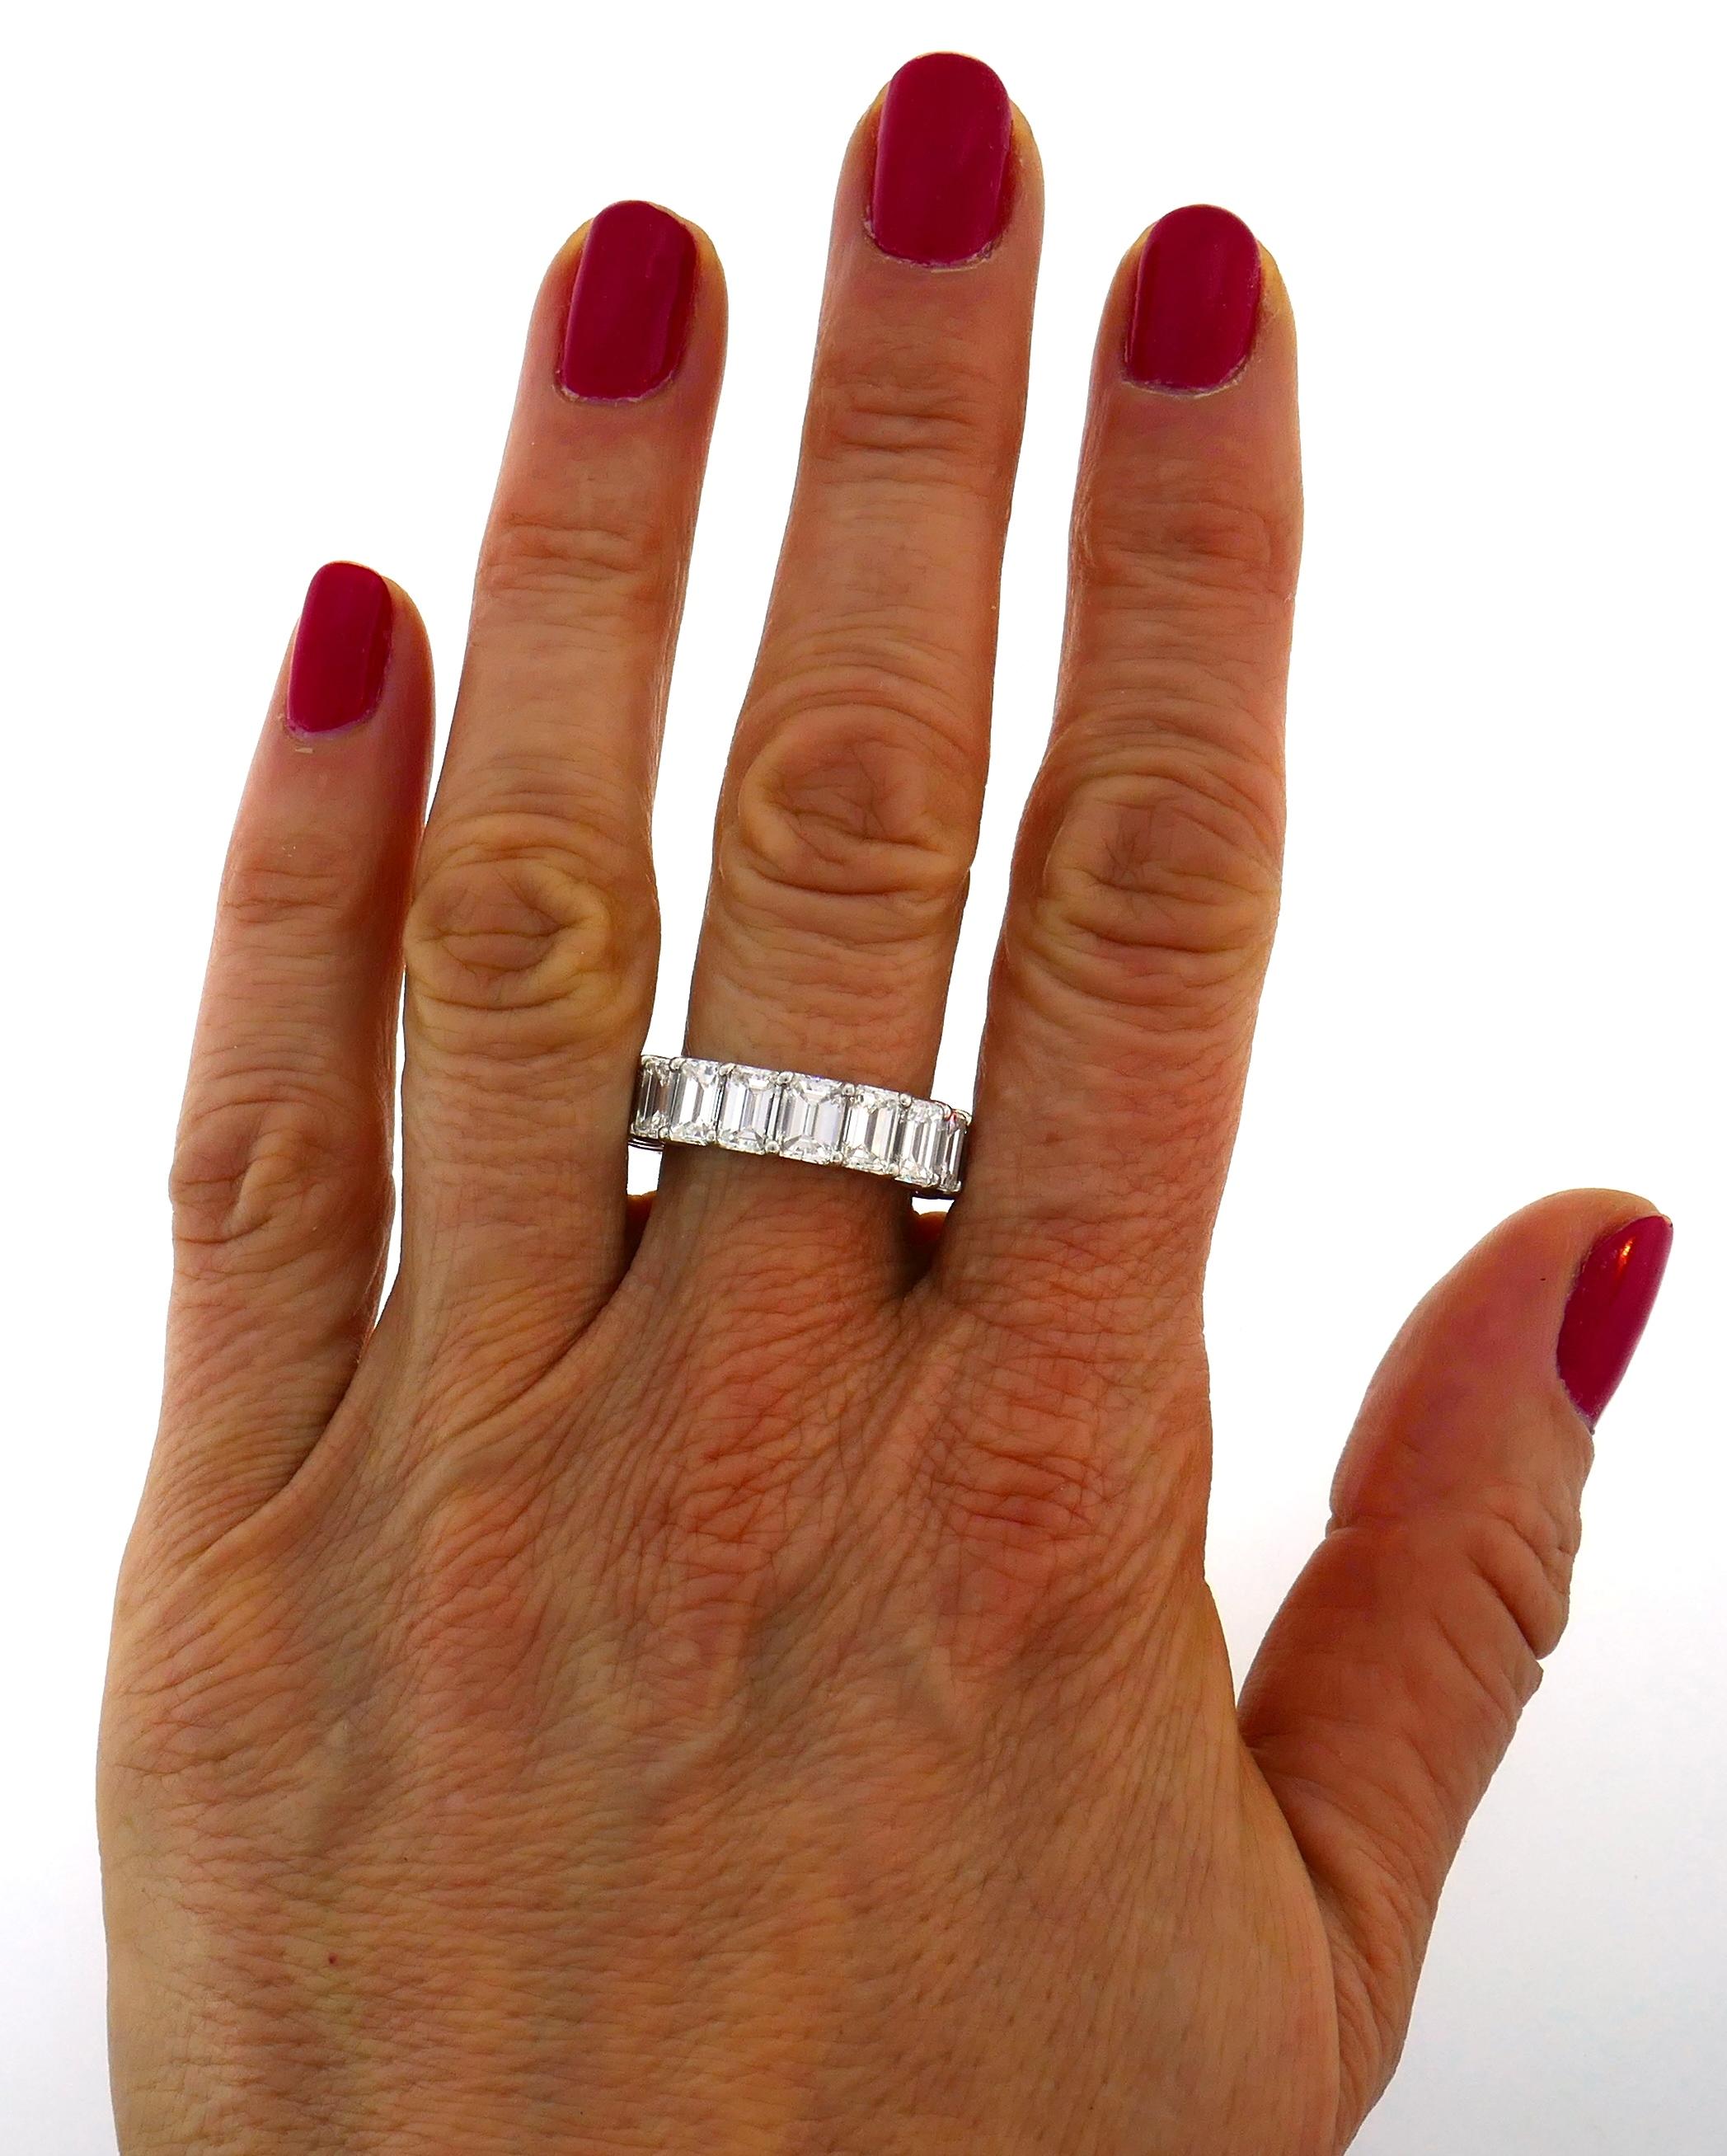  Classy and timeless, stunning diamond eternity band created by Harry Winston. 
Made of platinum and set with eighteen emerald cut diamonds approximately 0.53-carat each. Diamonds are D-F color VVS2 clarity, total weight 9.56 carats. 
Retail price